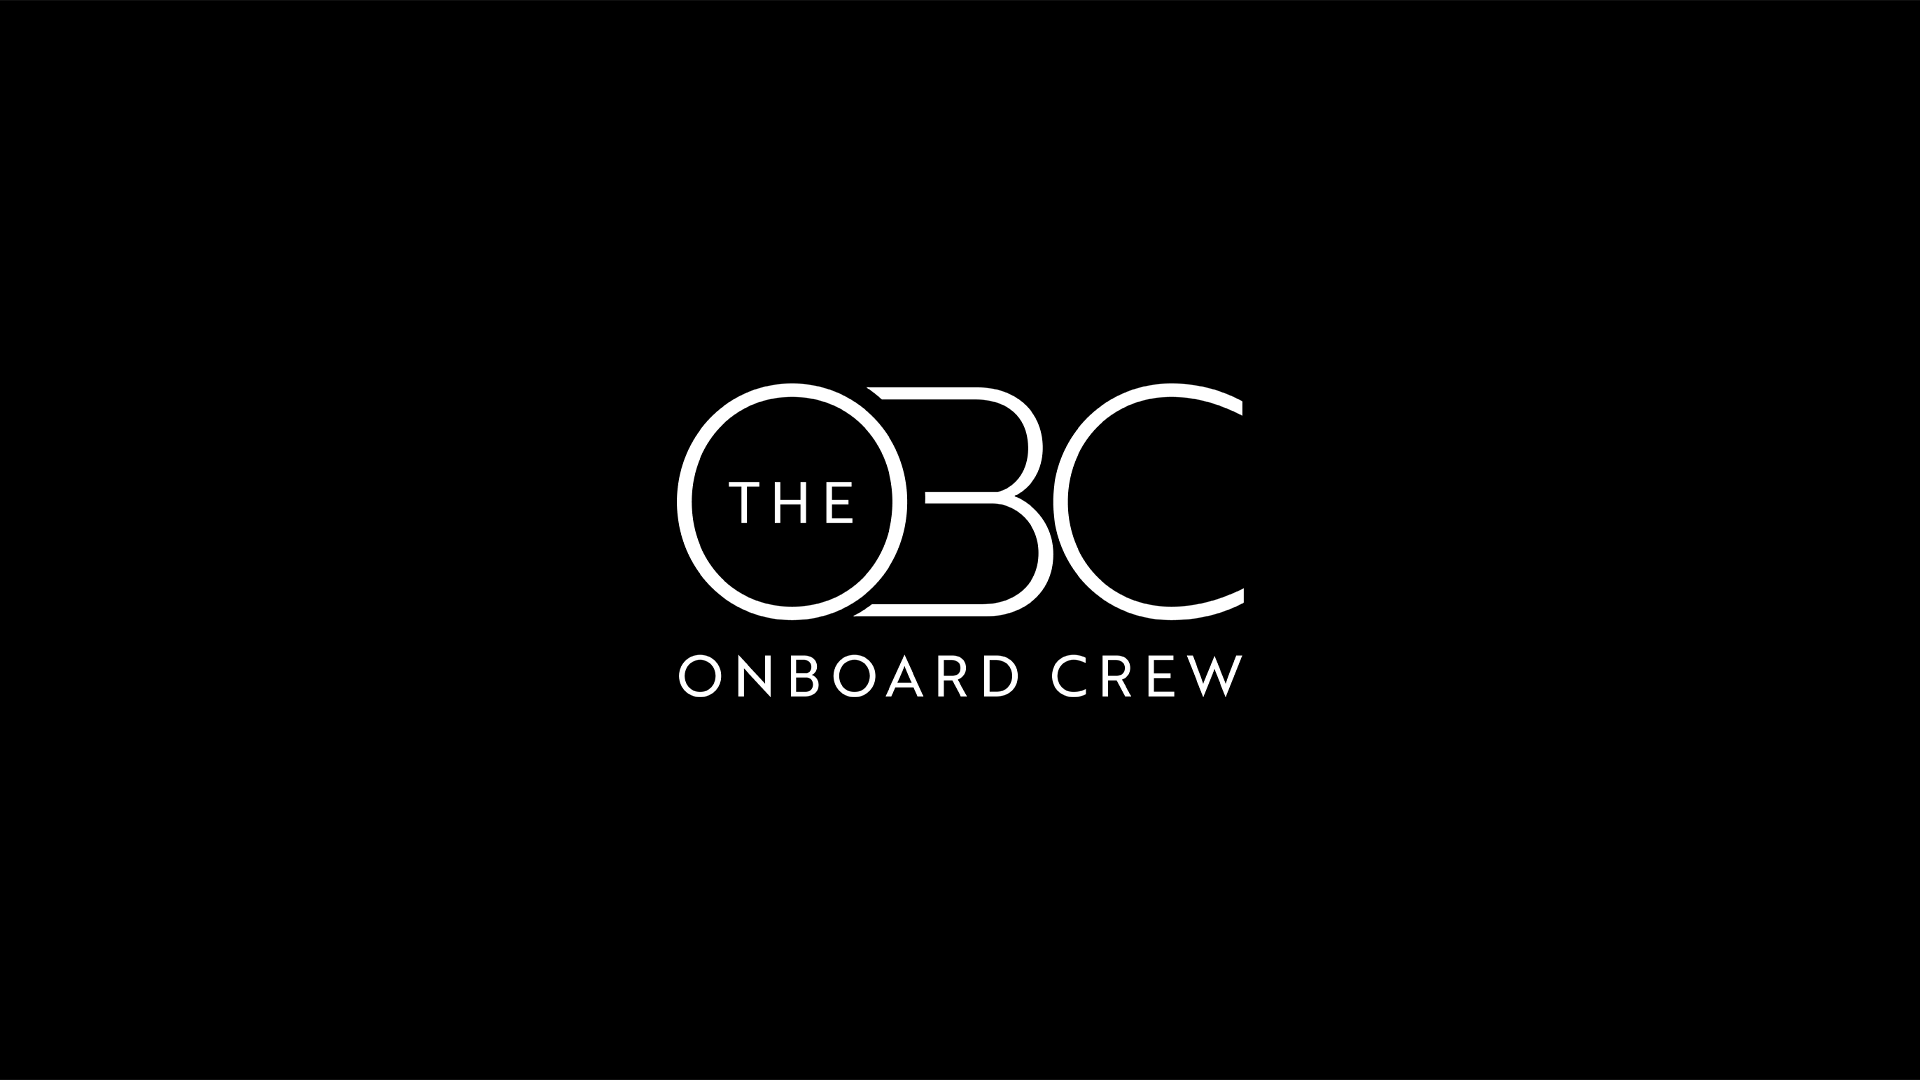 The OBC logo